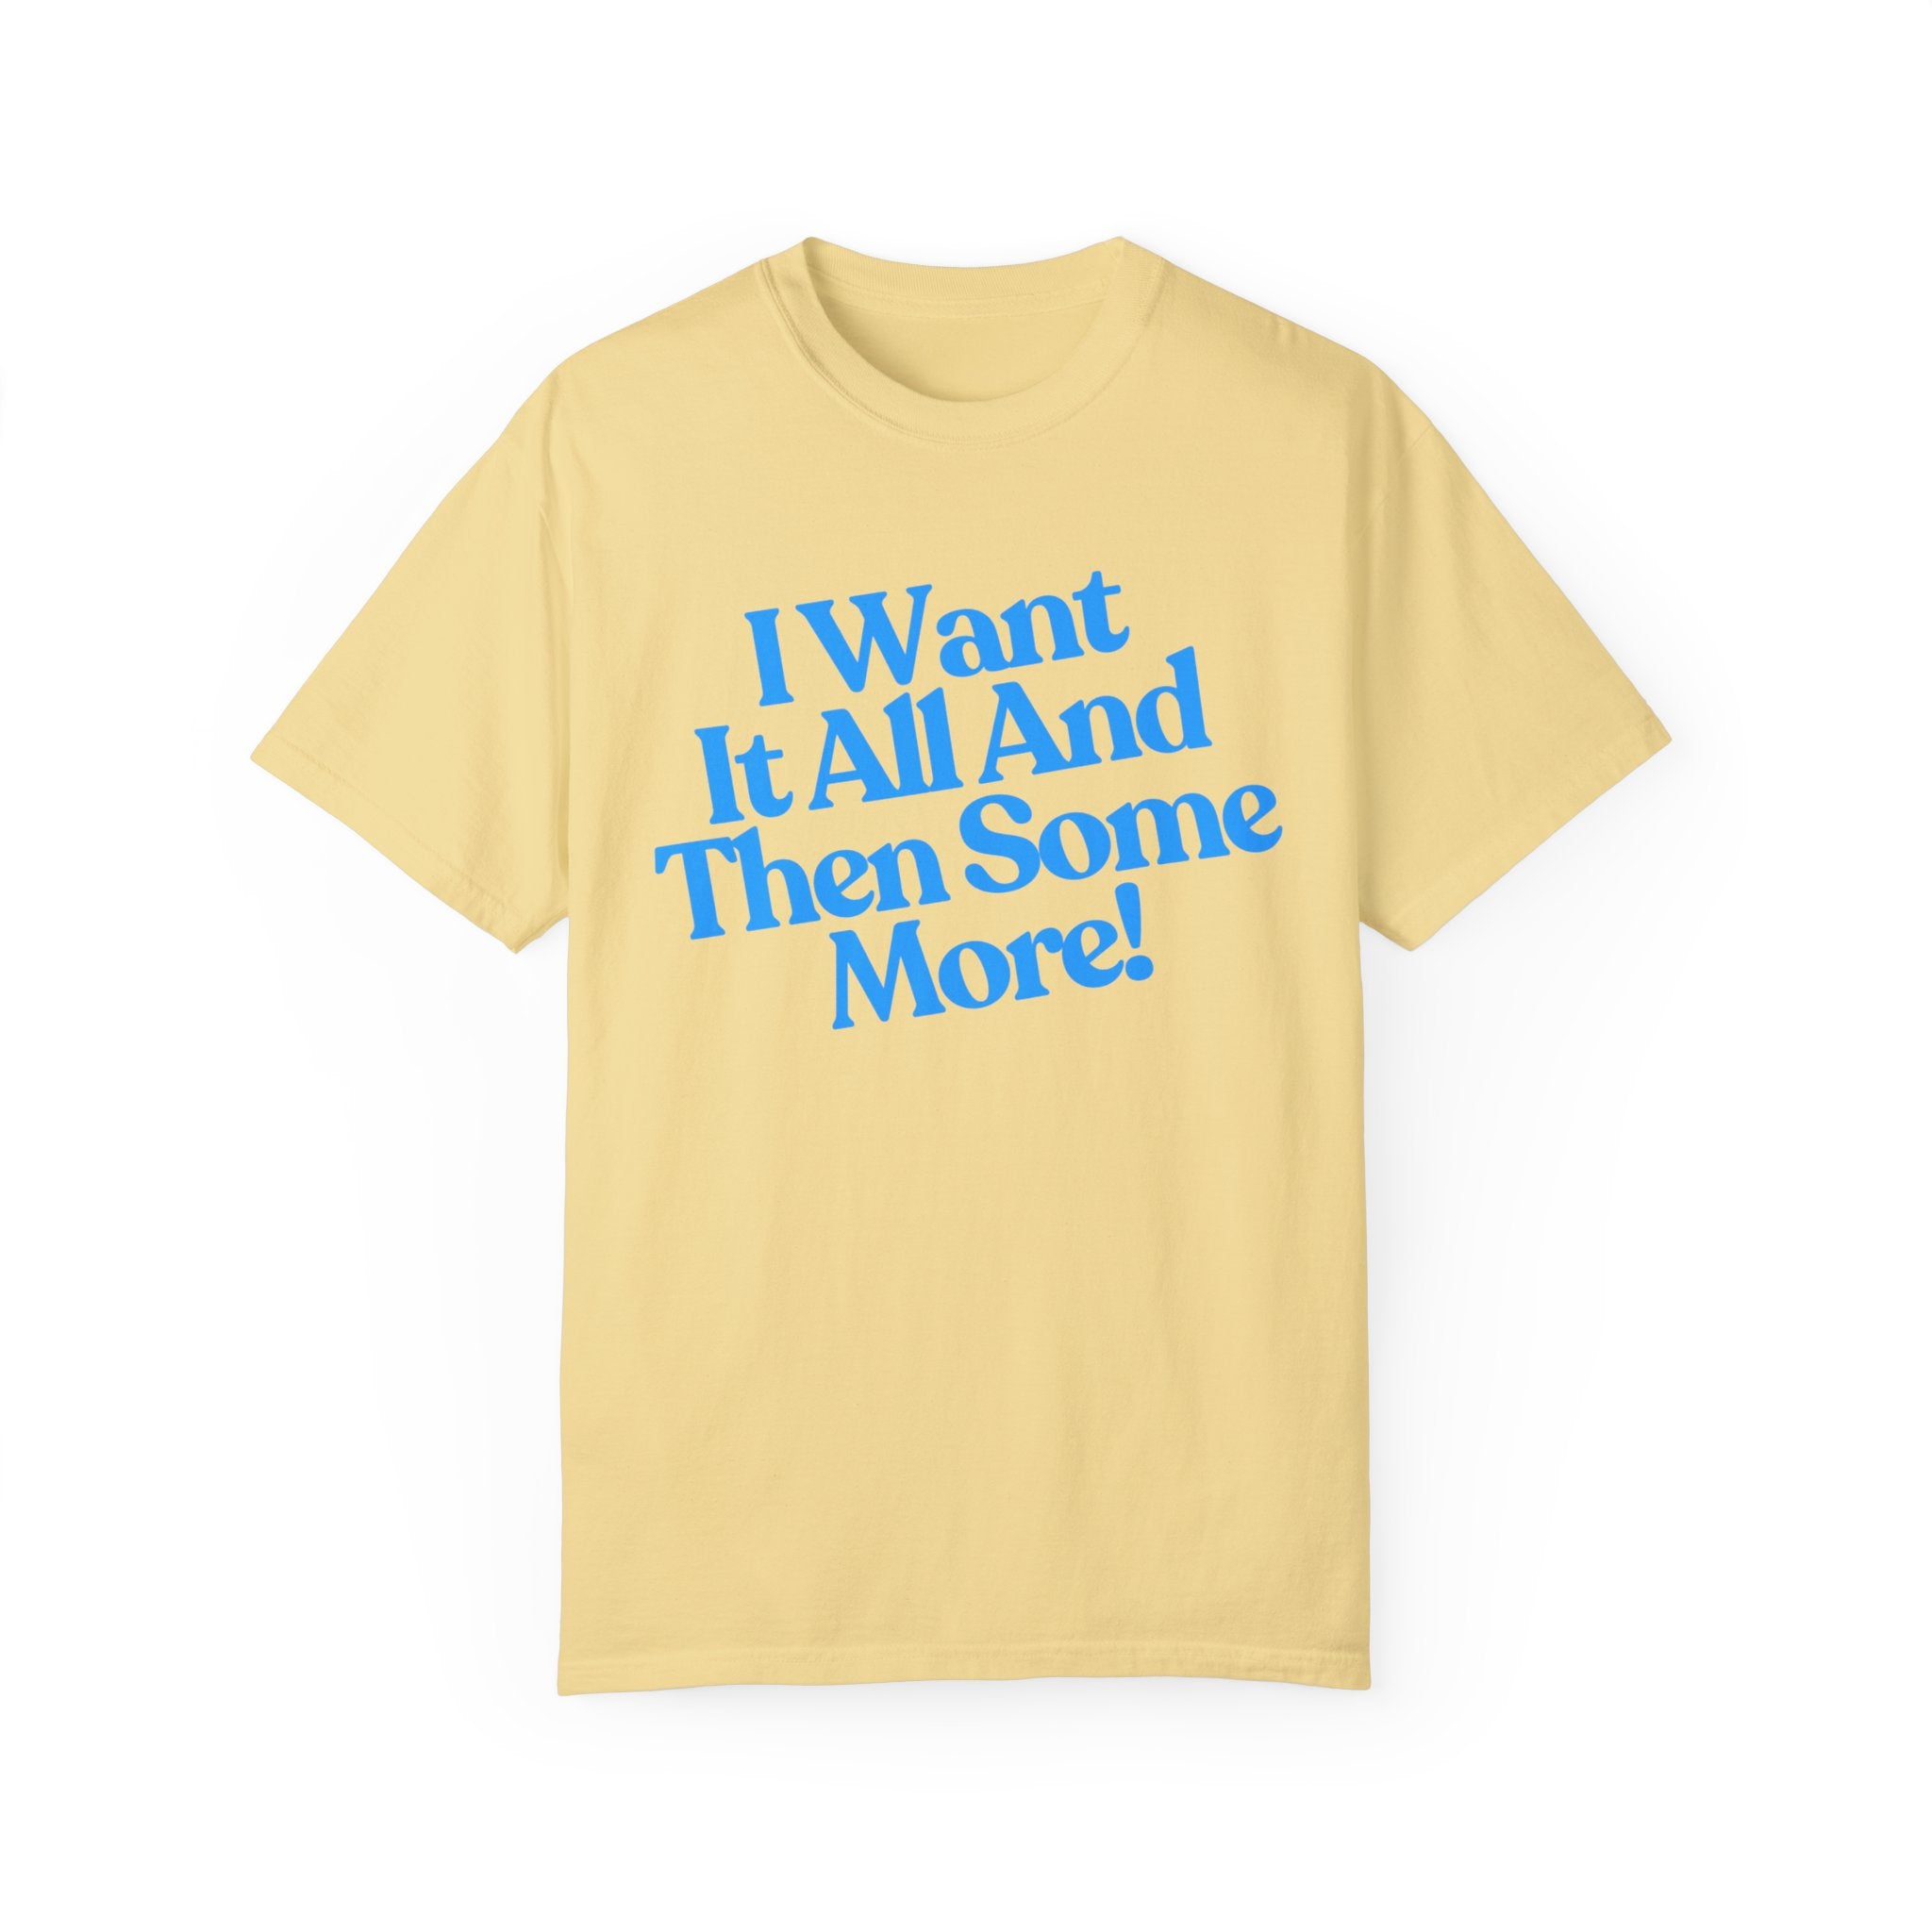 Copy of I Want It All And Then Some More Comfort Colors Shirt